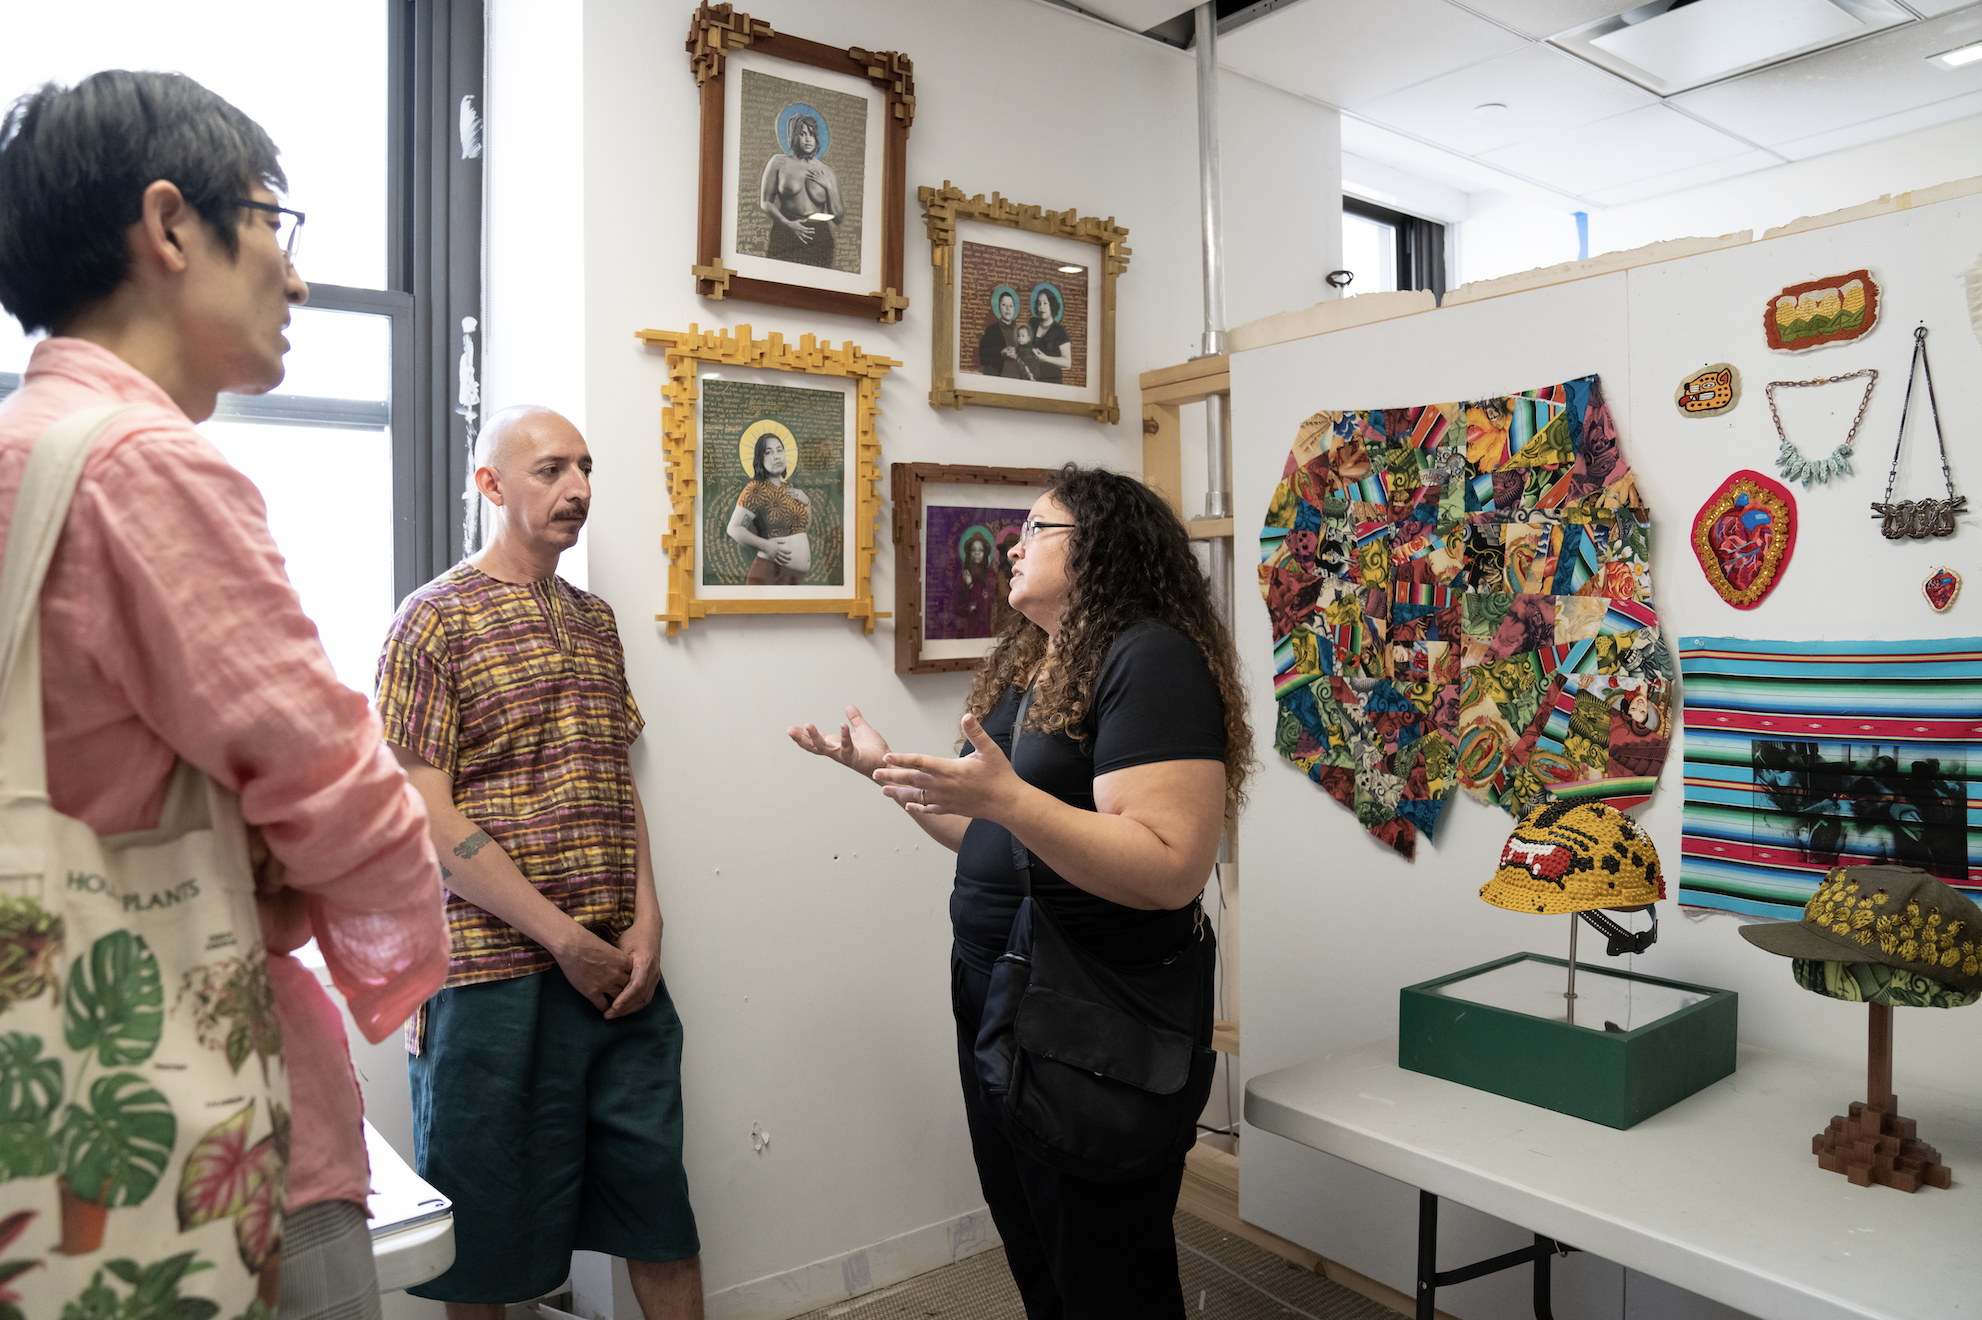 Three individuals standing in an artist studio having a conversation. Behind the individuals are two corner studio walls filled with colorful artwork including framed photo portraits, textile pieces, jewelry and sculptures of construction helmets, displayed on a table.